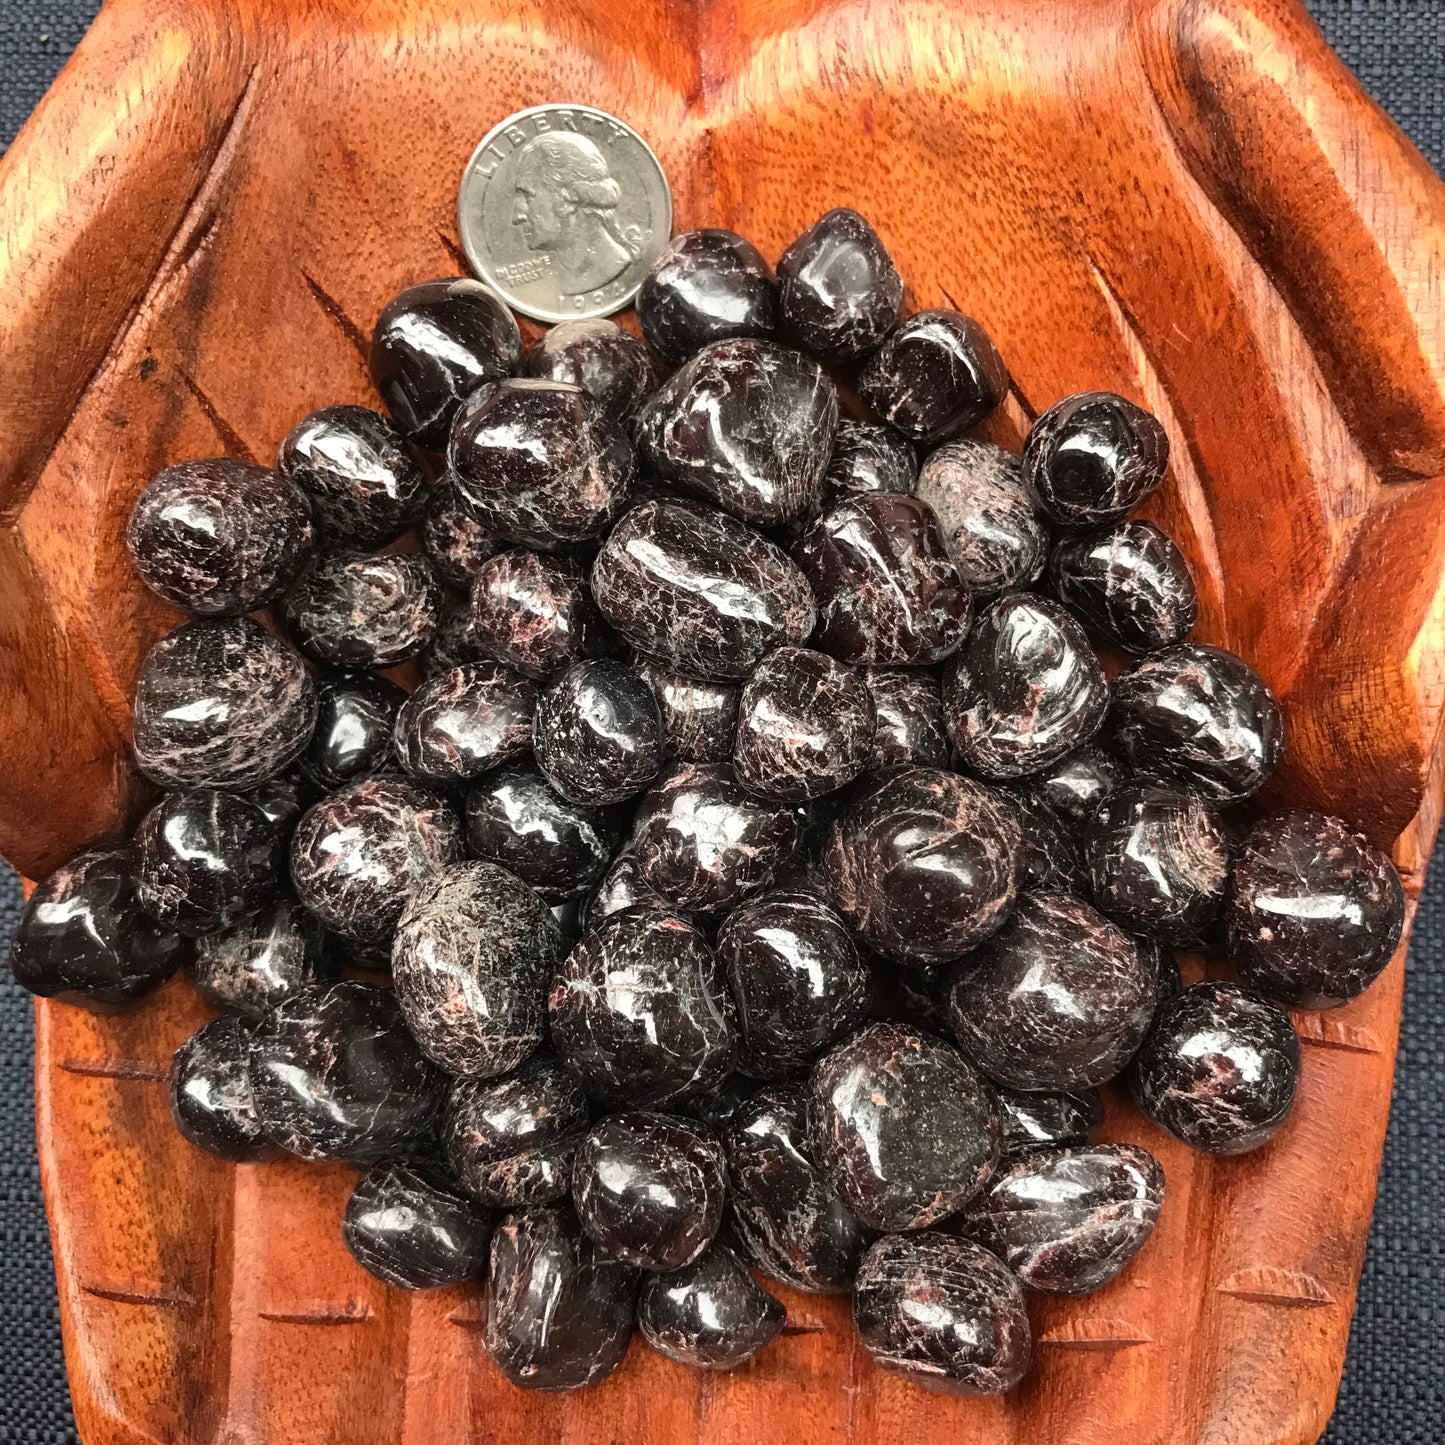 Garnet tumbled stones for grounding and health!